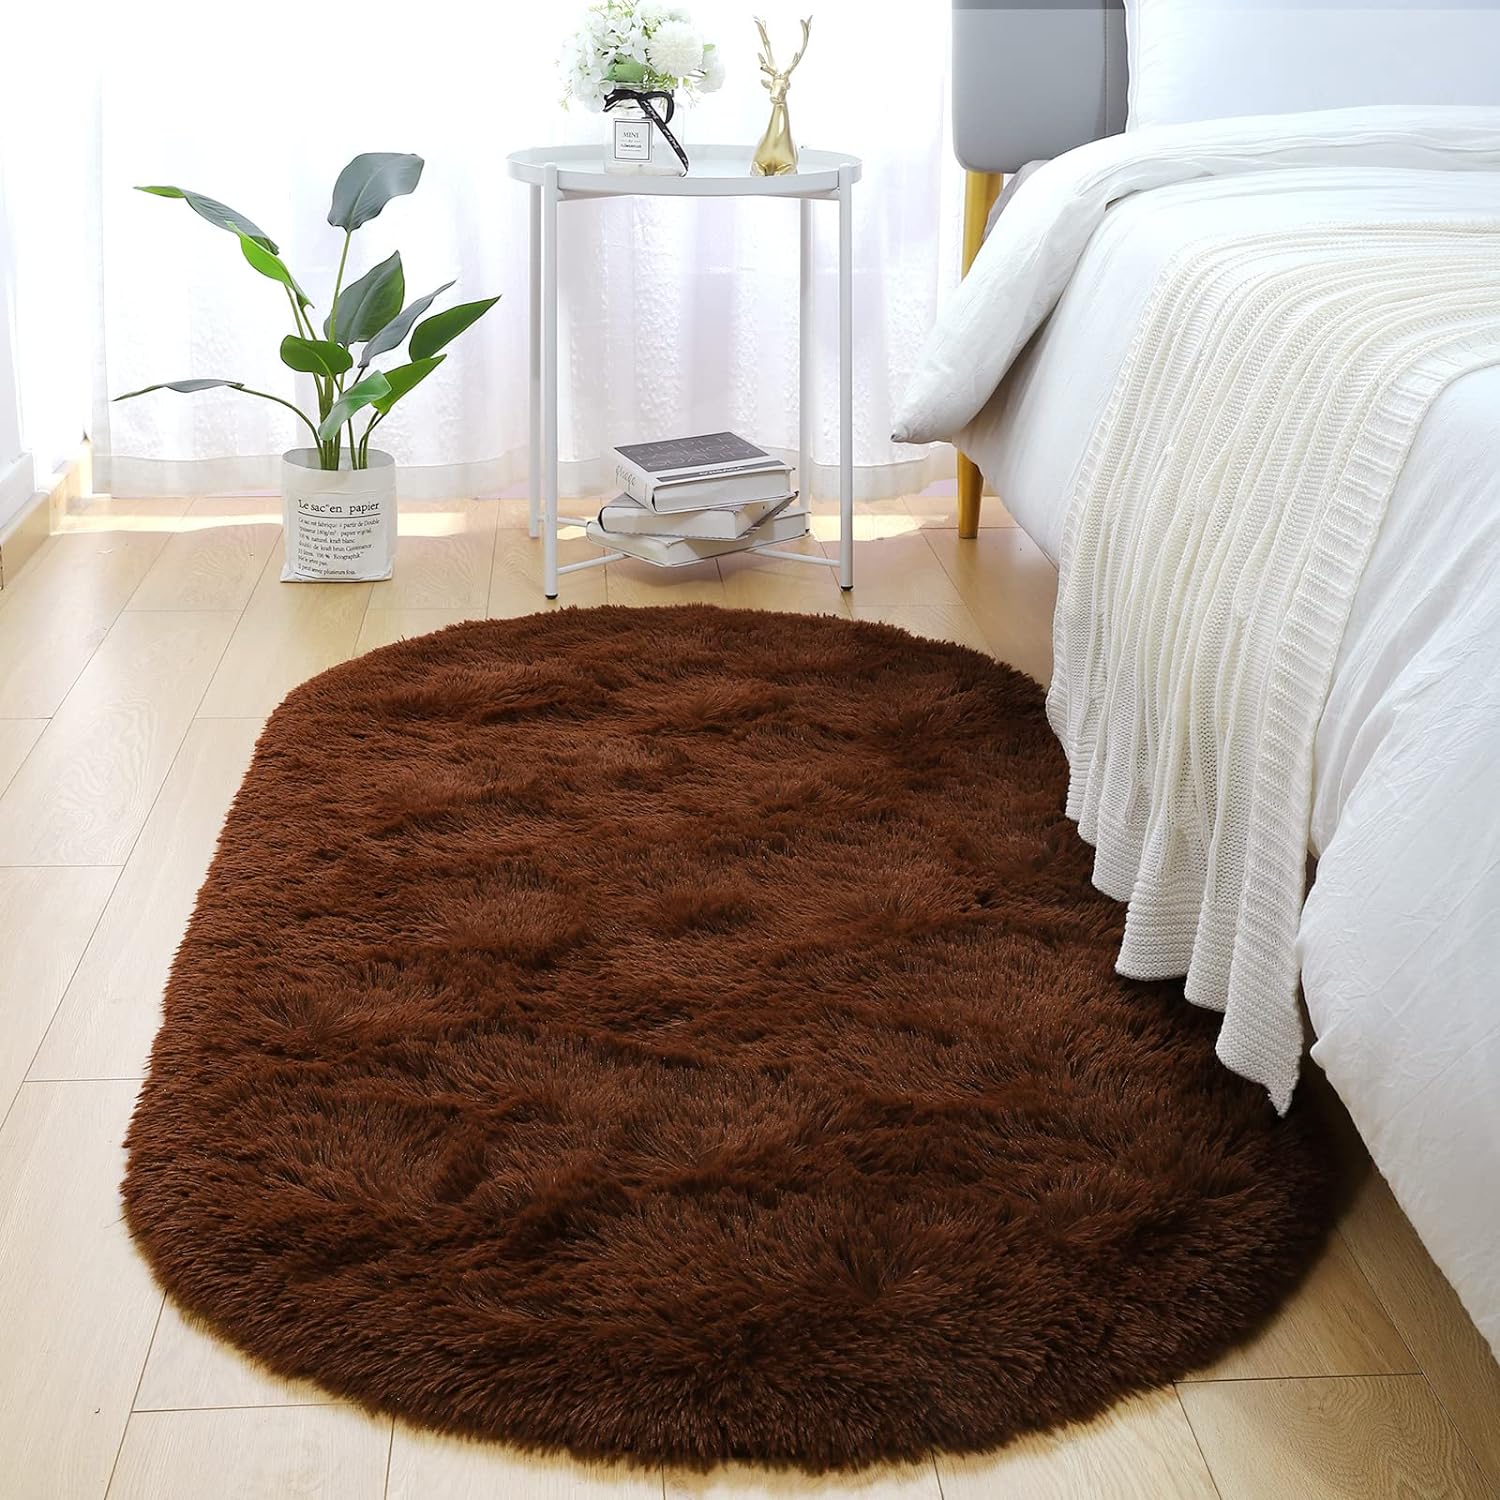 Merelax Soft Shaggy Rug for Kids Bedroom Oval 2.6'x5.3' Brown Plush Fluffy Carpet for Living Room, Furry Carpet for Teen Girls Room, Anti-Skid Fuzzy Comfy Rug for Nursery Decor Cute Baby Play Mat